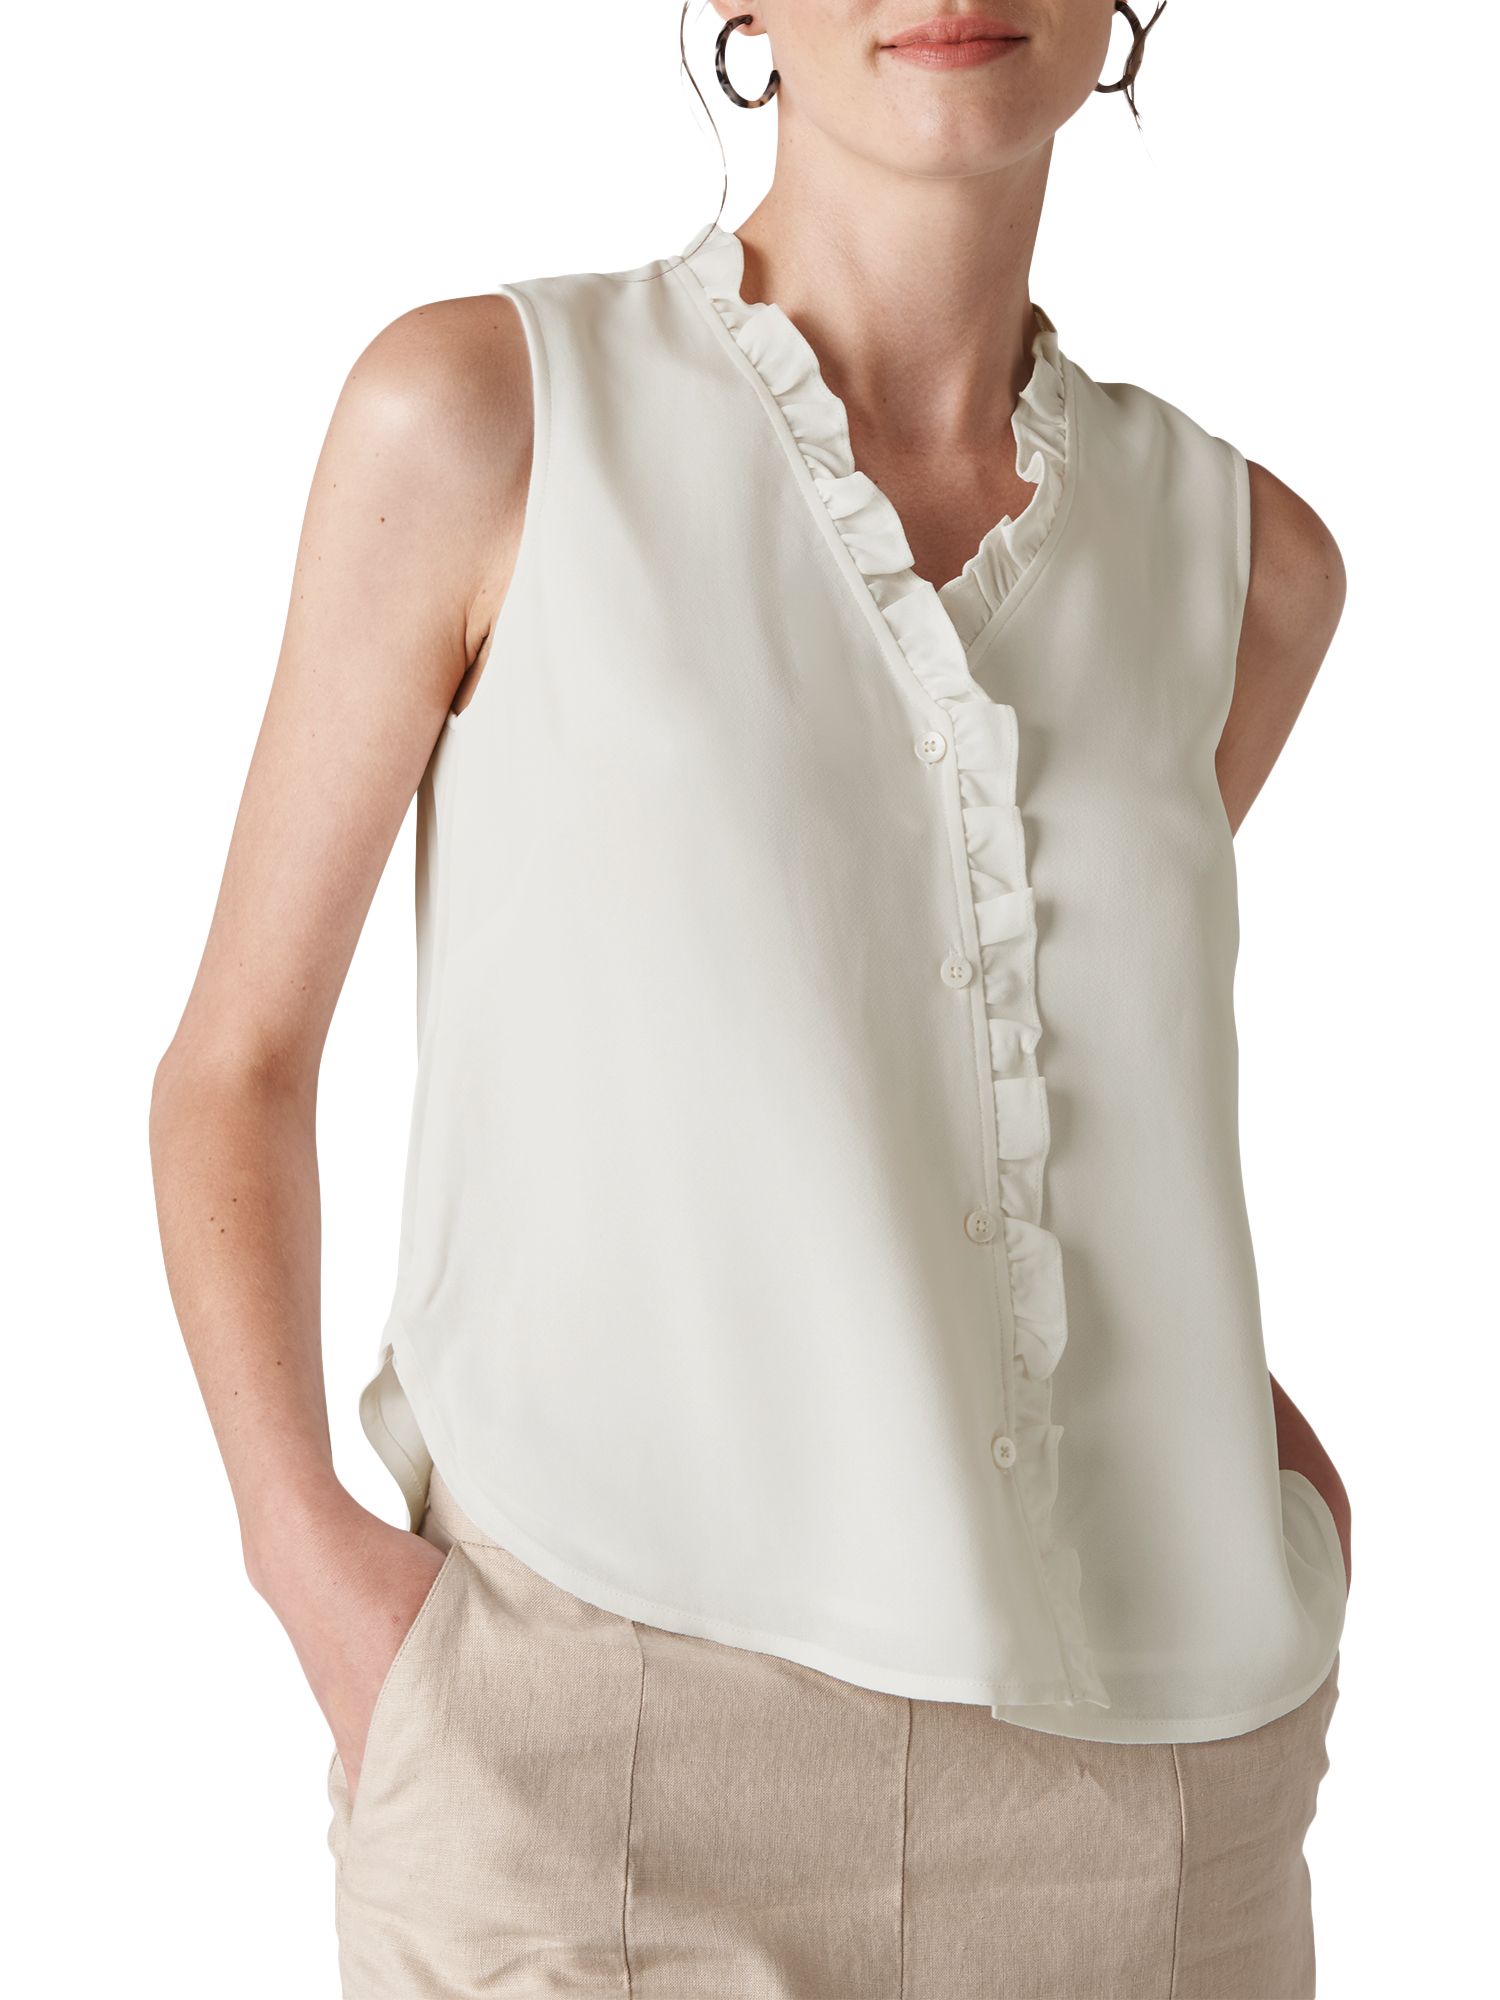 Whistles Maddie Frill Top, Ivory